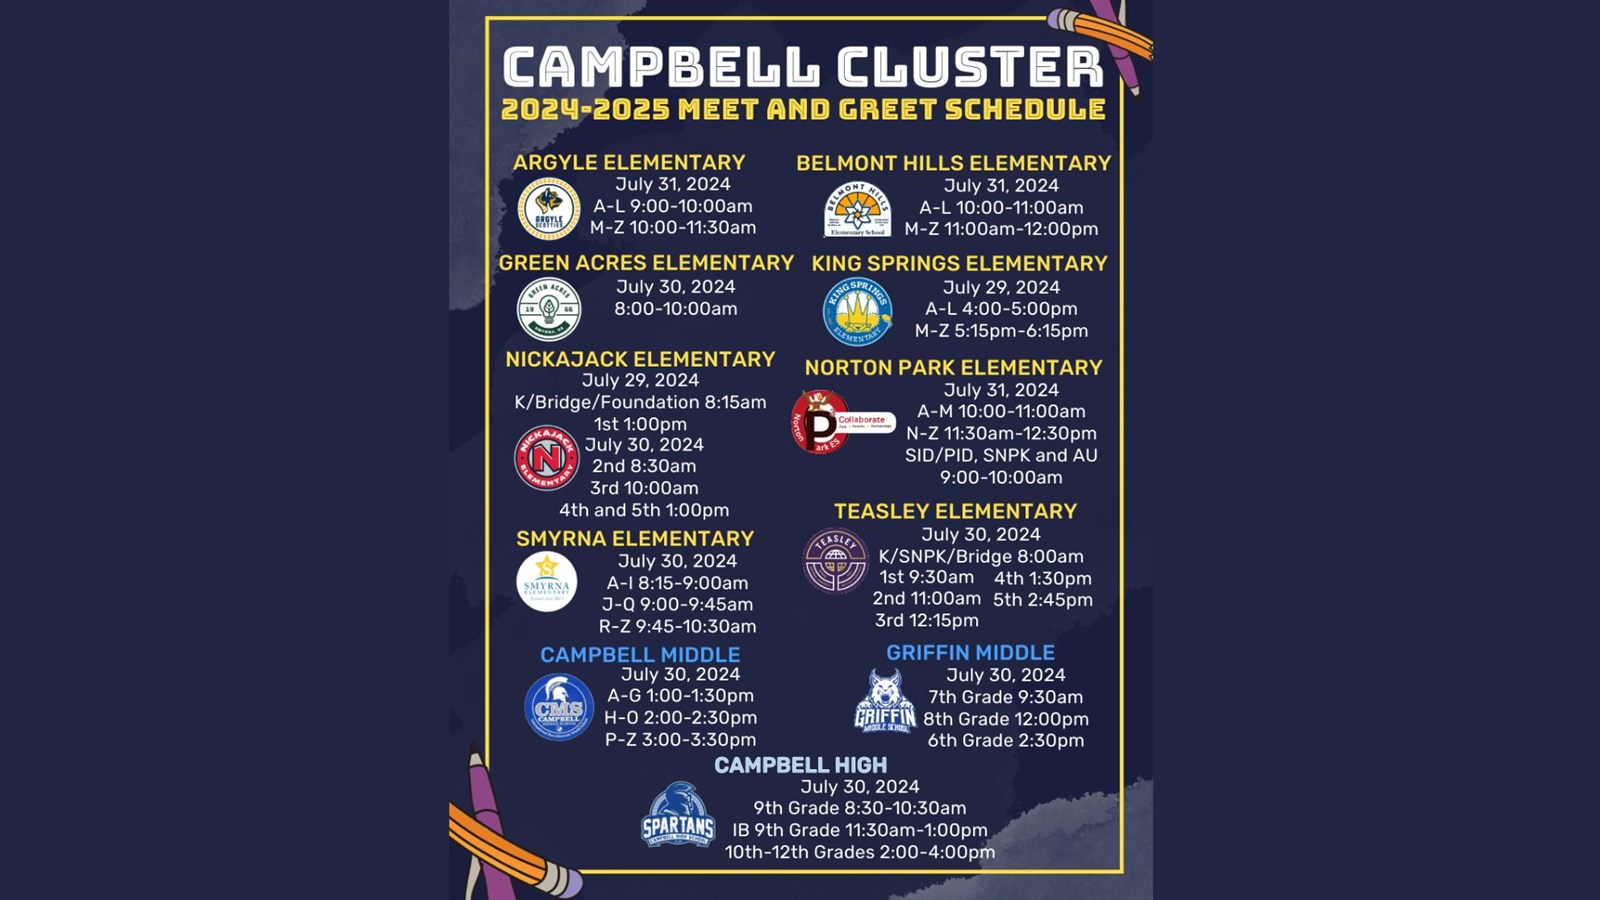 CAMPBELL CLUSTER 2024-2025 MEET AND GREET SCHEDULE 